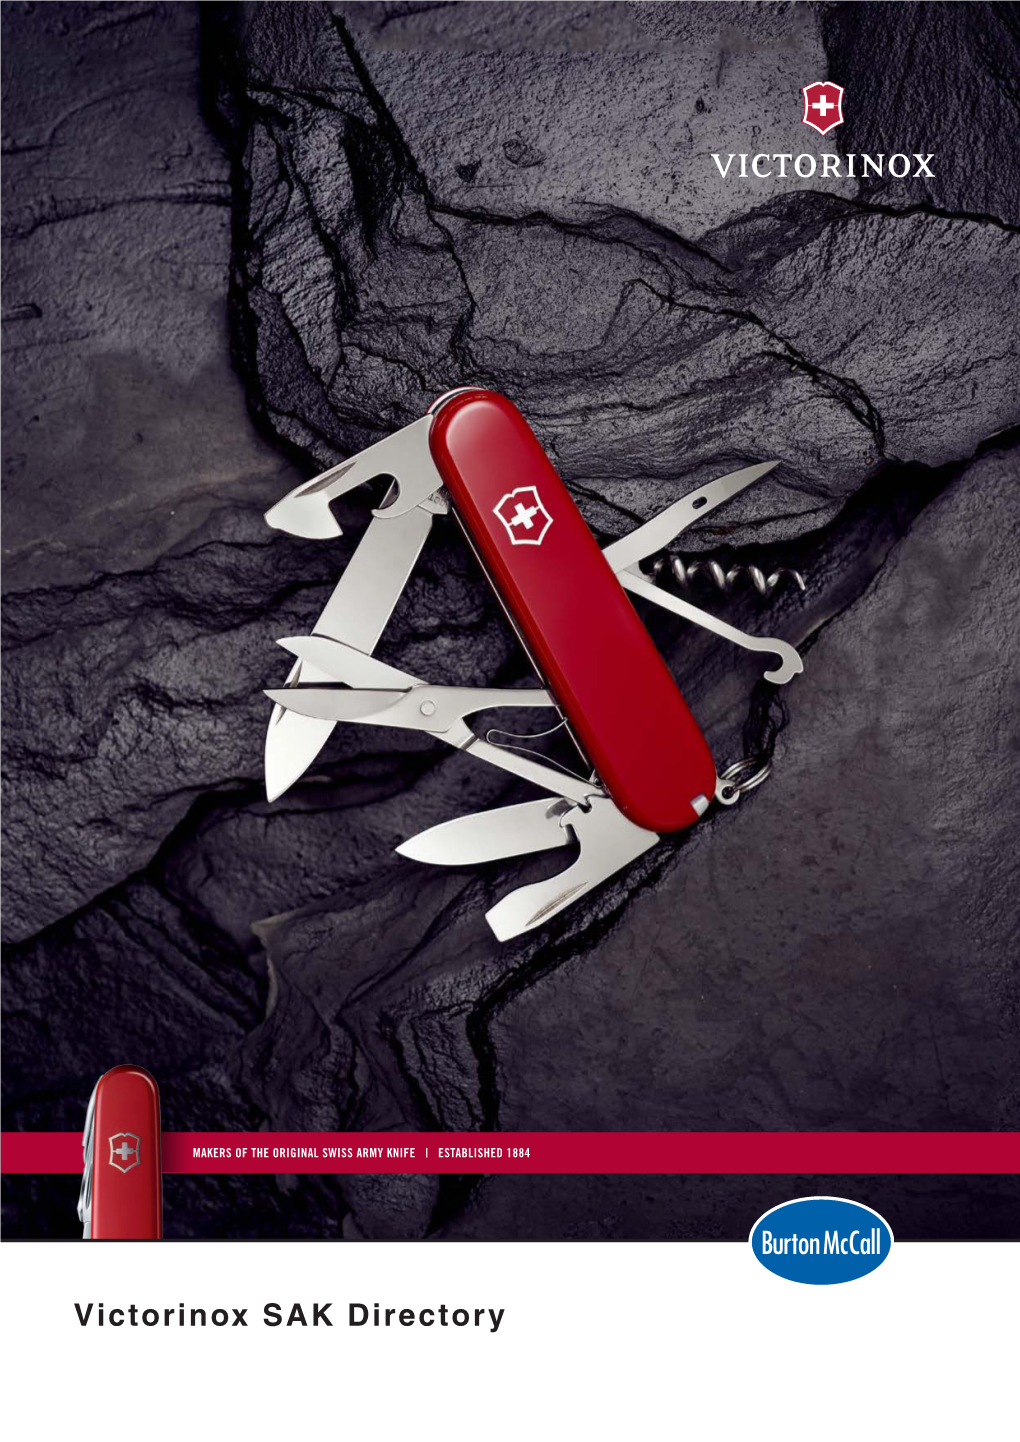 Victorinox SAK Directory VICTORINOX 1884 - 2021 MORE THAN 130 YEARS of EXPERIENCE and LIVED SWISS TRADITION